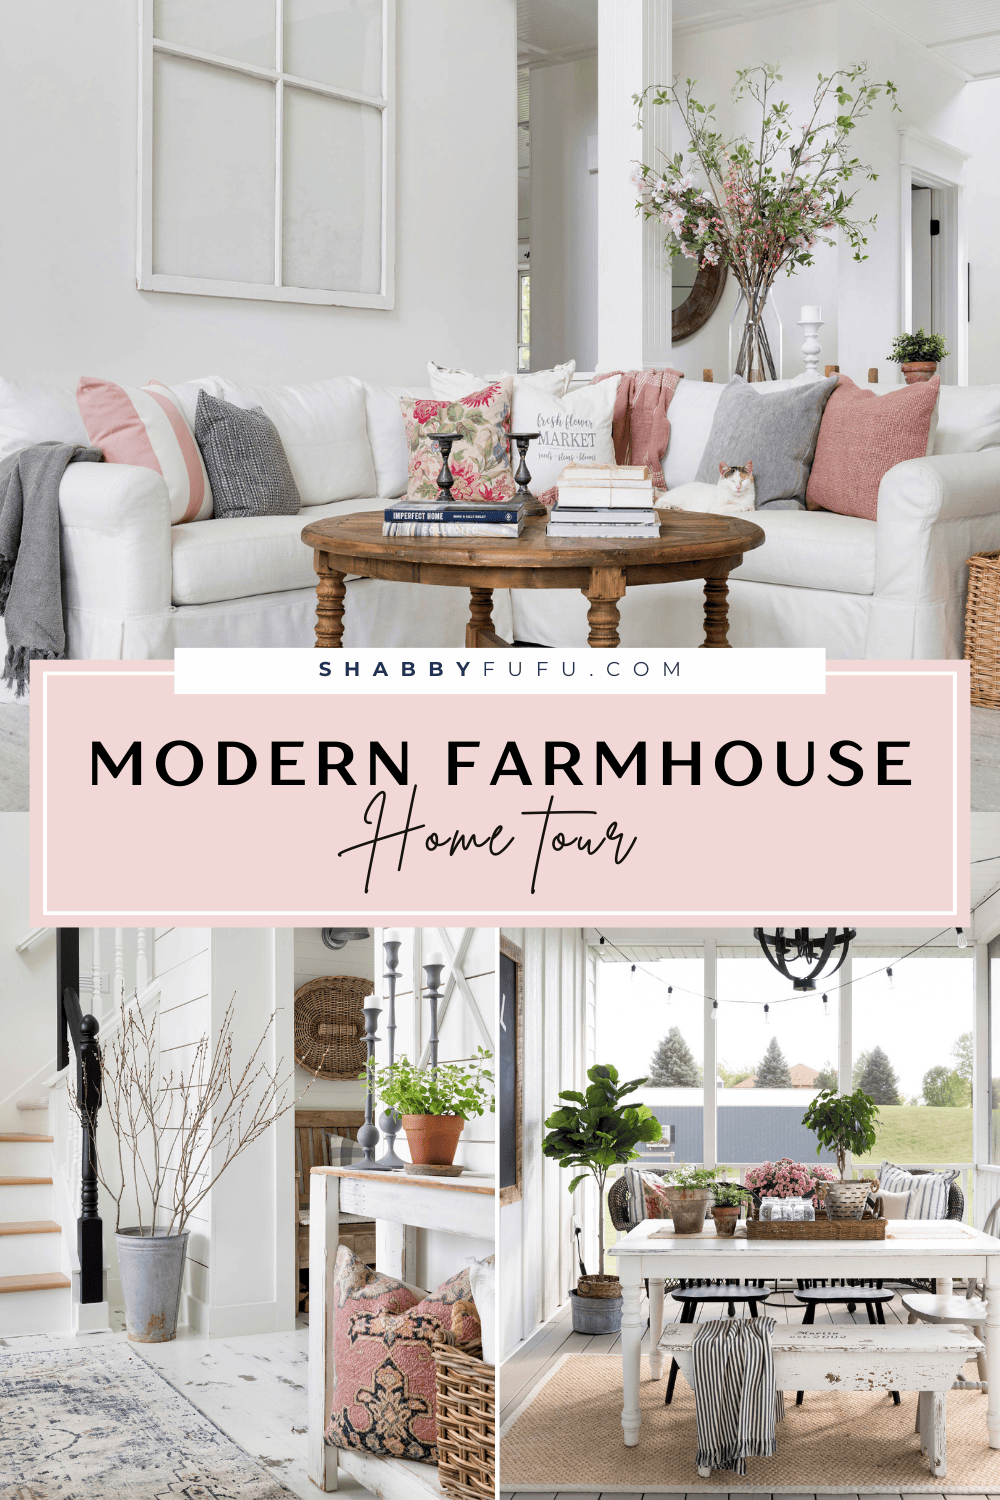 Pinterest decorative pin featuring a collage of images from a home tour titled "modern farmhouse - home tour"